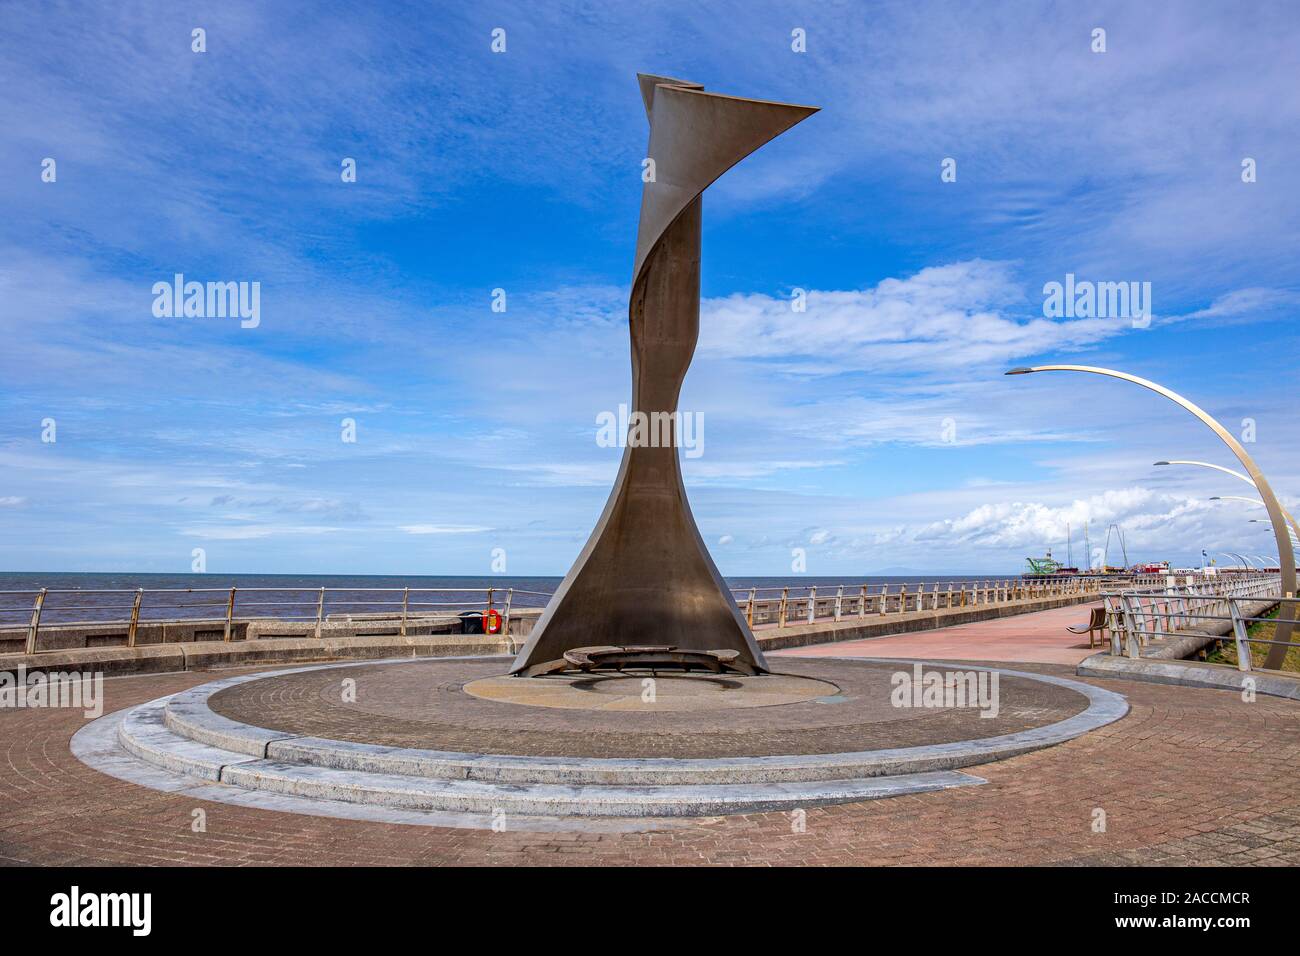 Rotating wind shelter on the South beach in Blackpool Lancashire UK Stock Photo